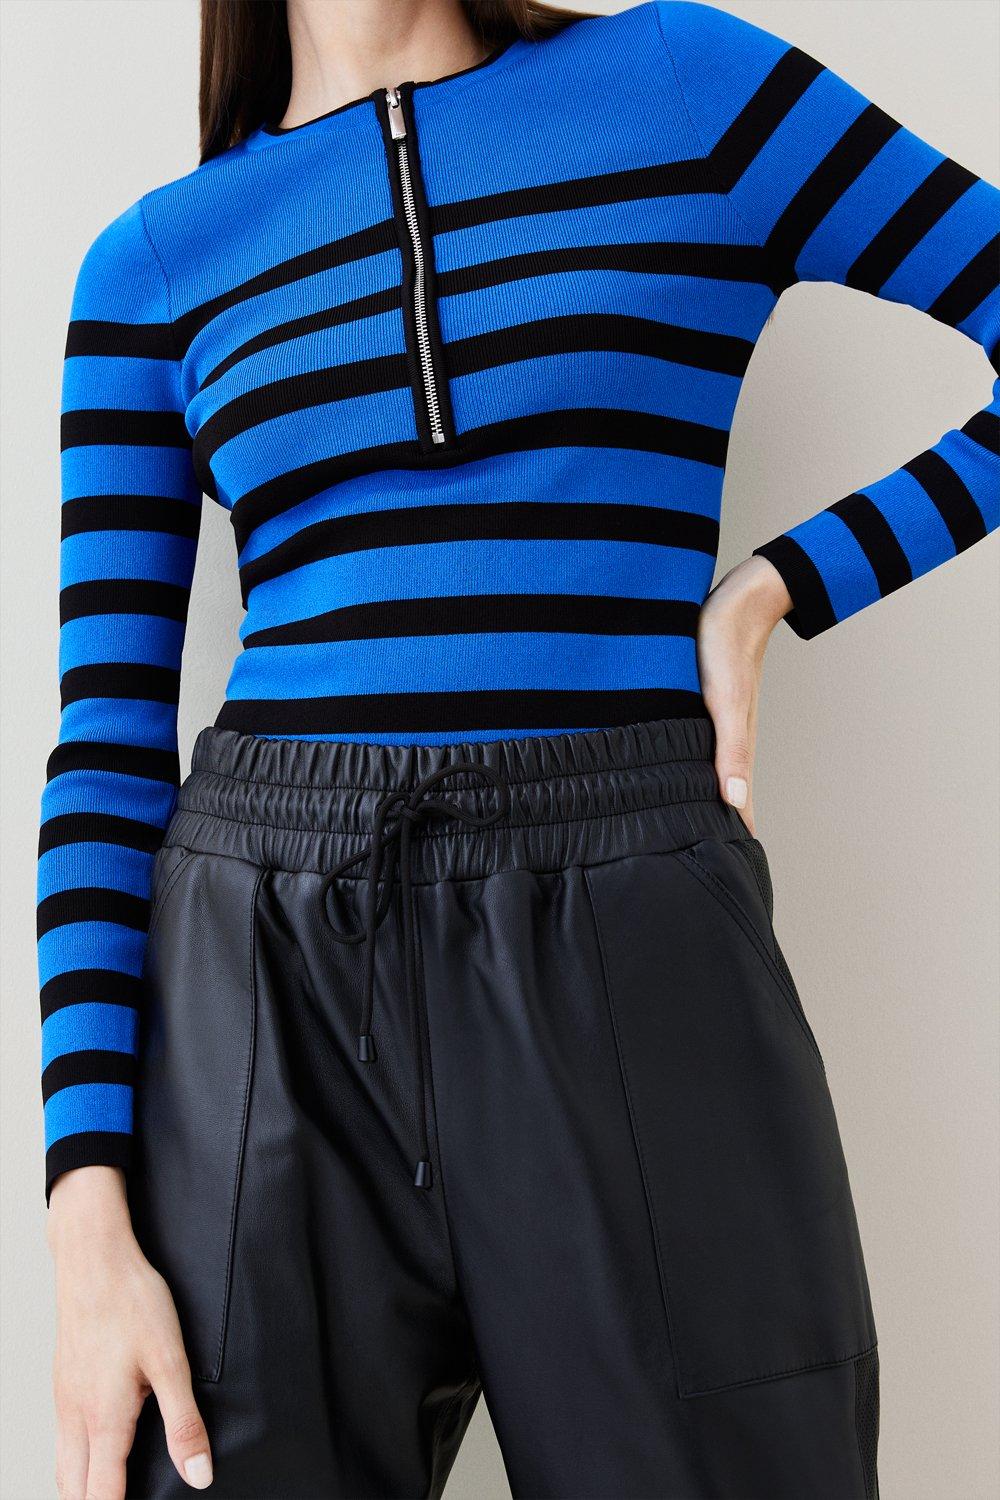 Long Sleeve Nautical Zip Front Knit Top